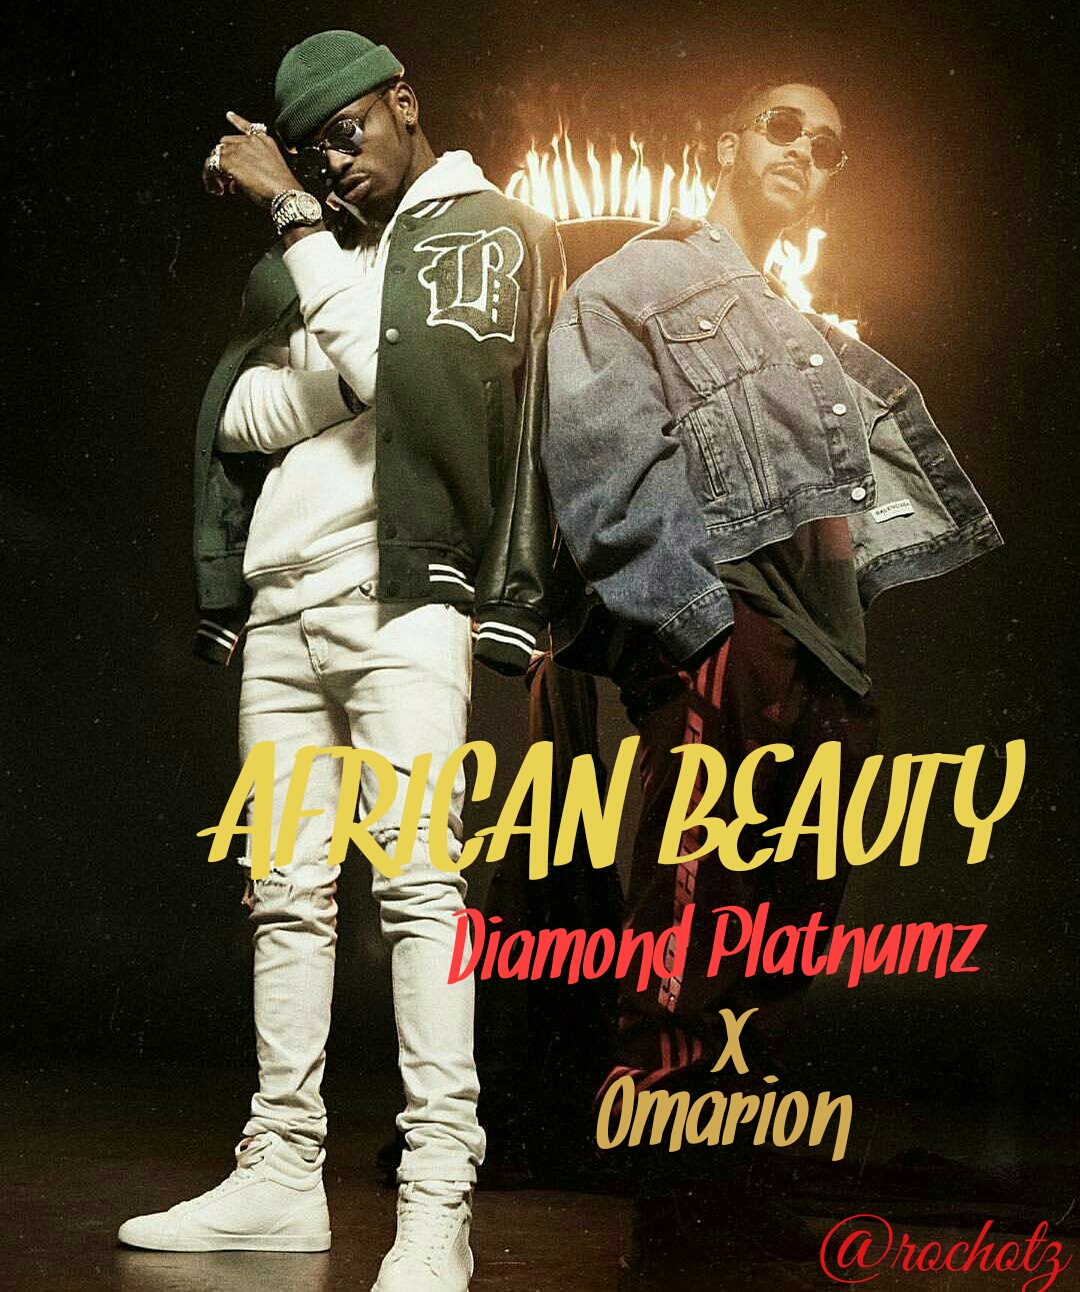 Download Audio African Beauty By Diamond Platnumz Ft Omarion Rocho Tz 1 Most Visitable Website In Tanzania